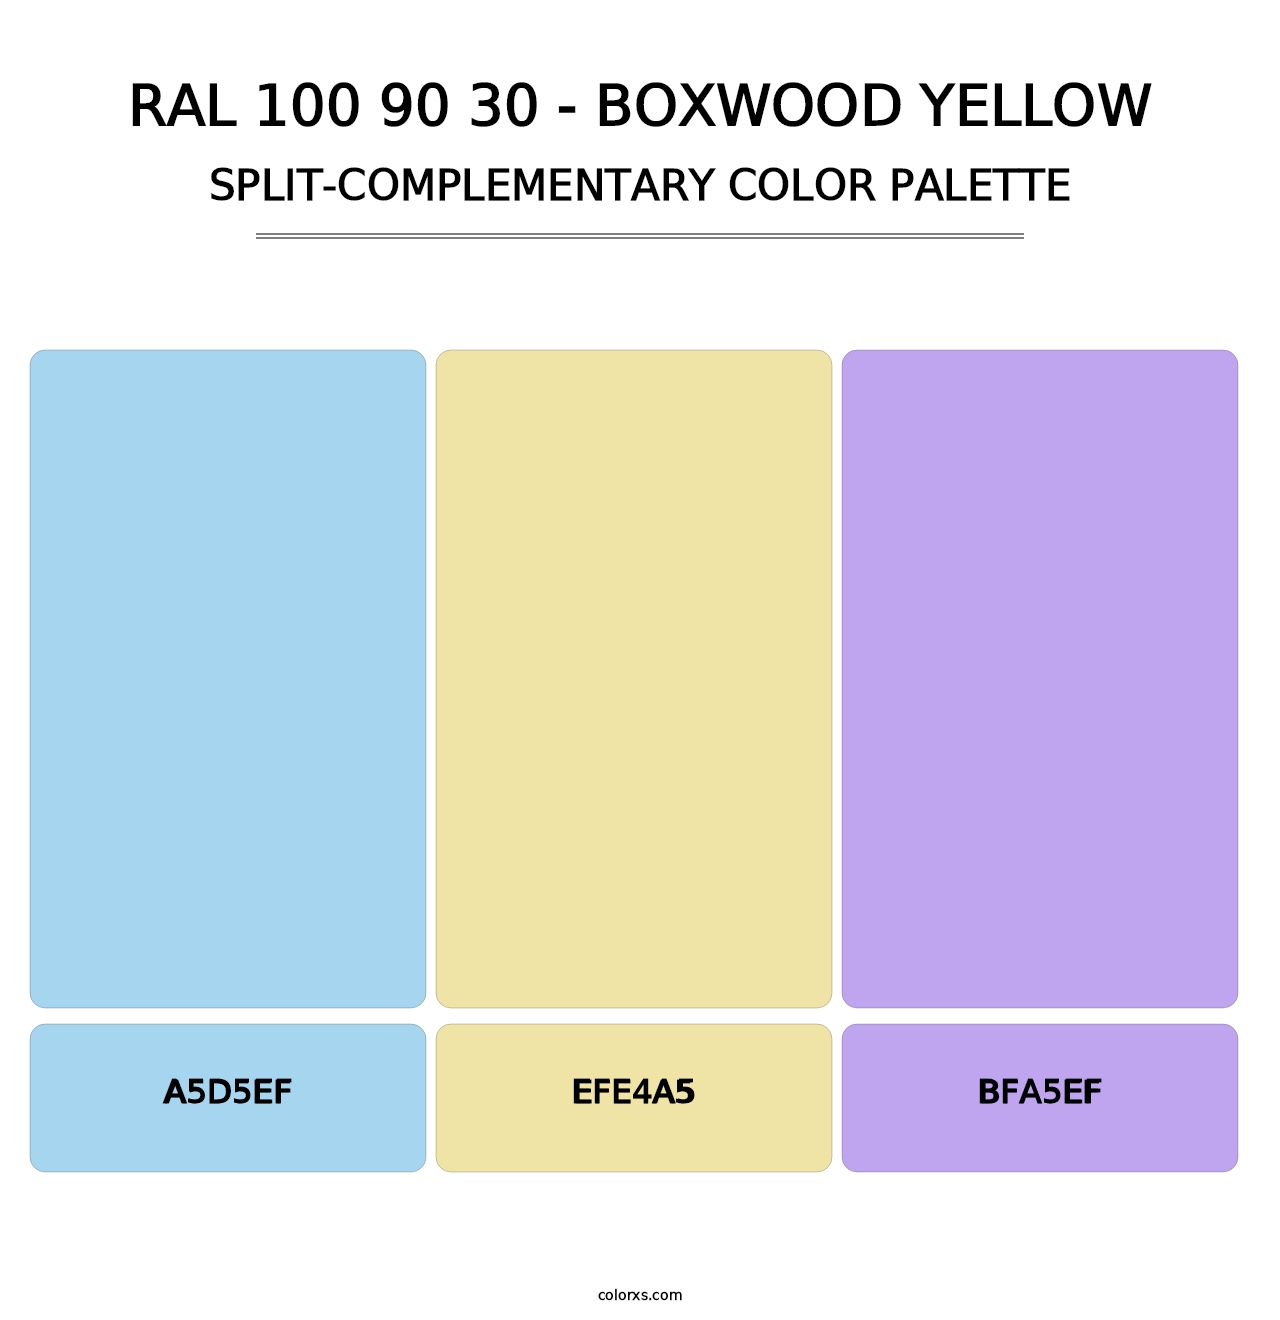 RAL 100 90 30 - Boxwood Yellow - Split-Complementary Color Palette